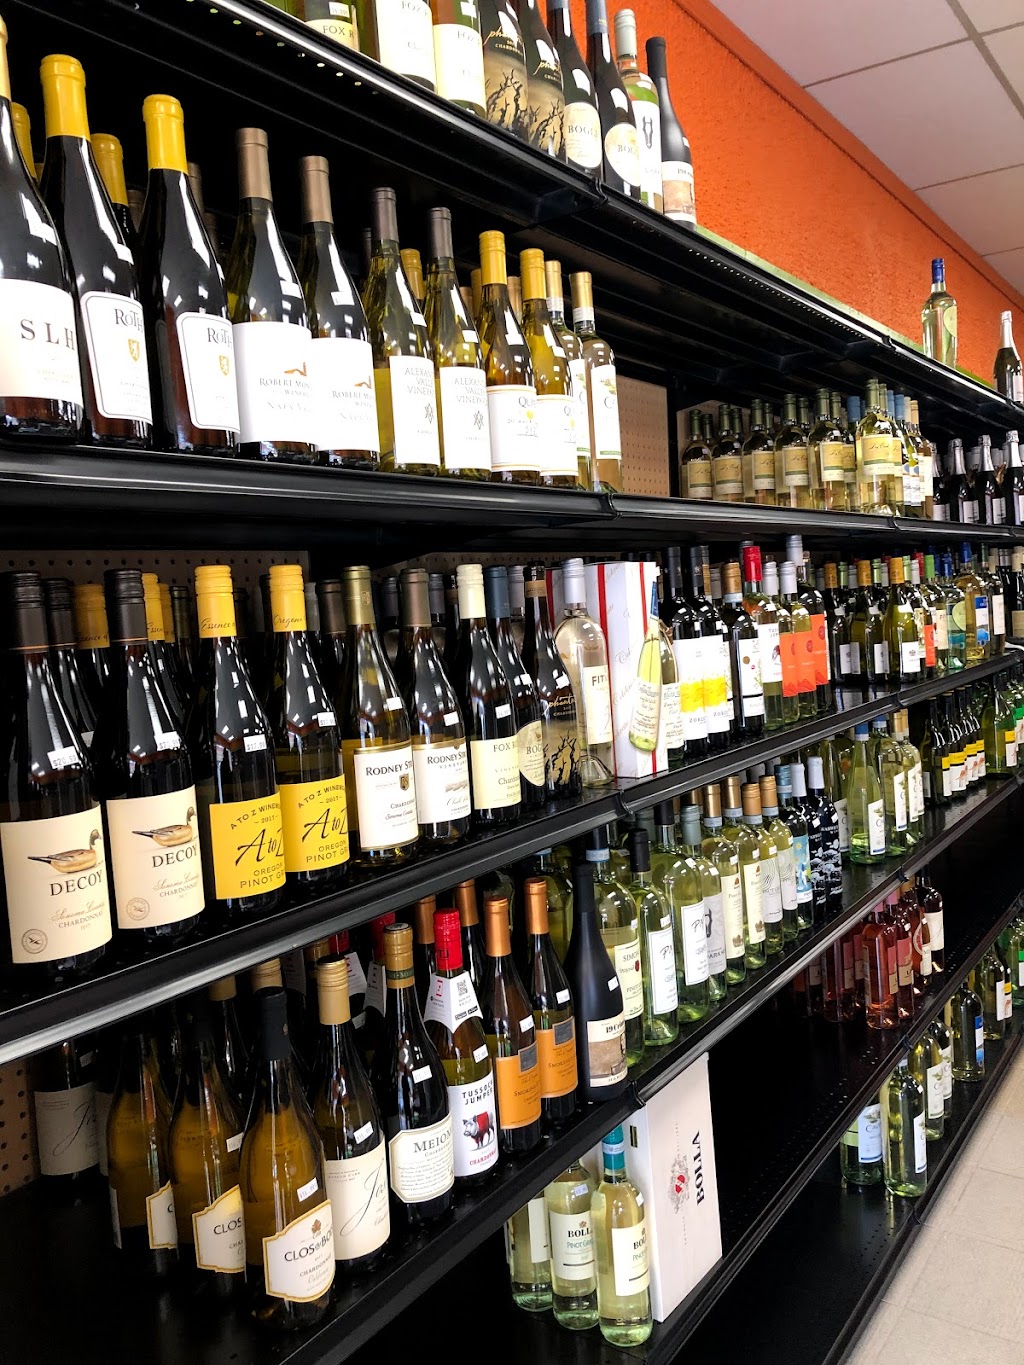 Lincolndale Wine & Liquor | 155 US-202, Somers, NY 10589 | Phone: (914) 768-4339